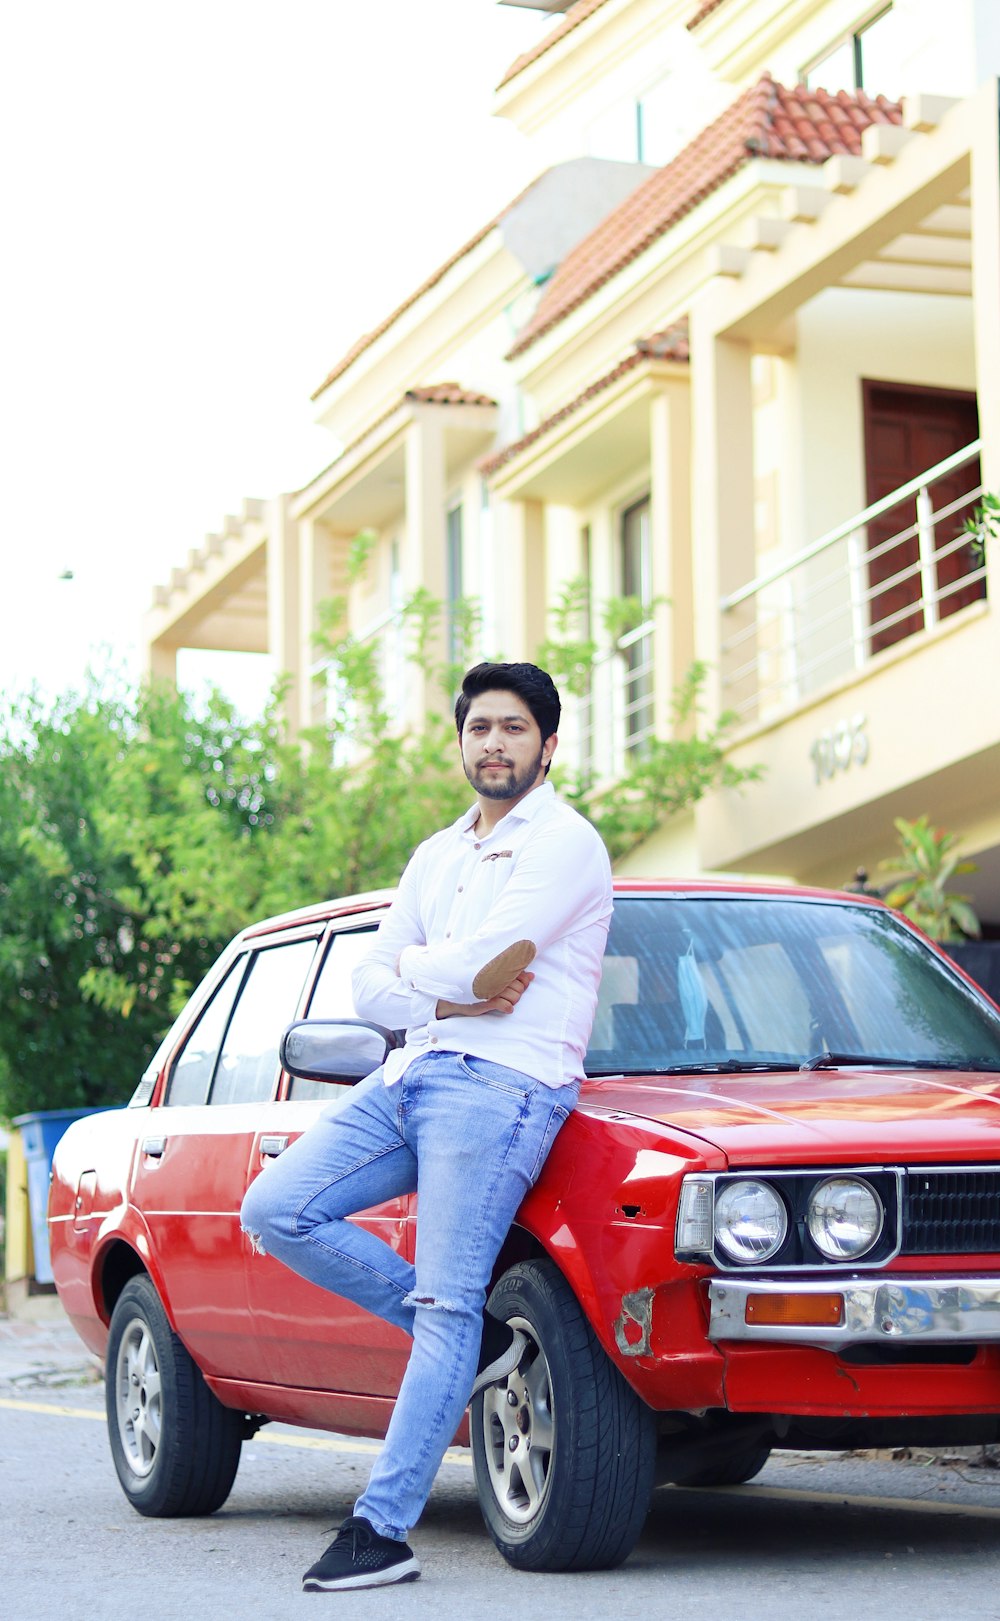 man in white dress shirt and blue denim jeans sitting on red car